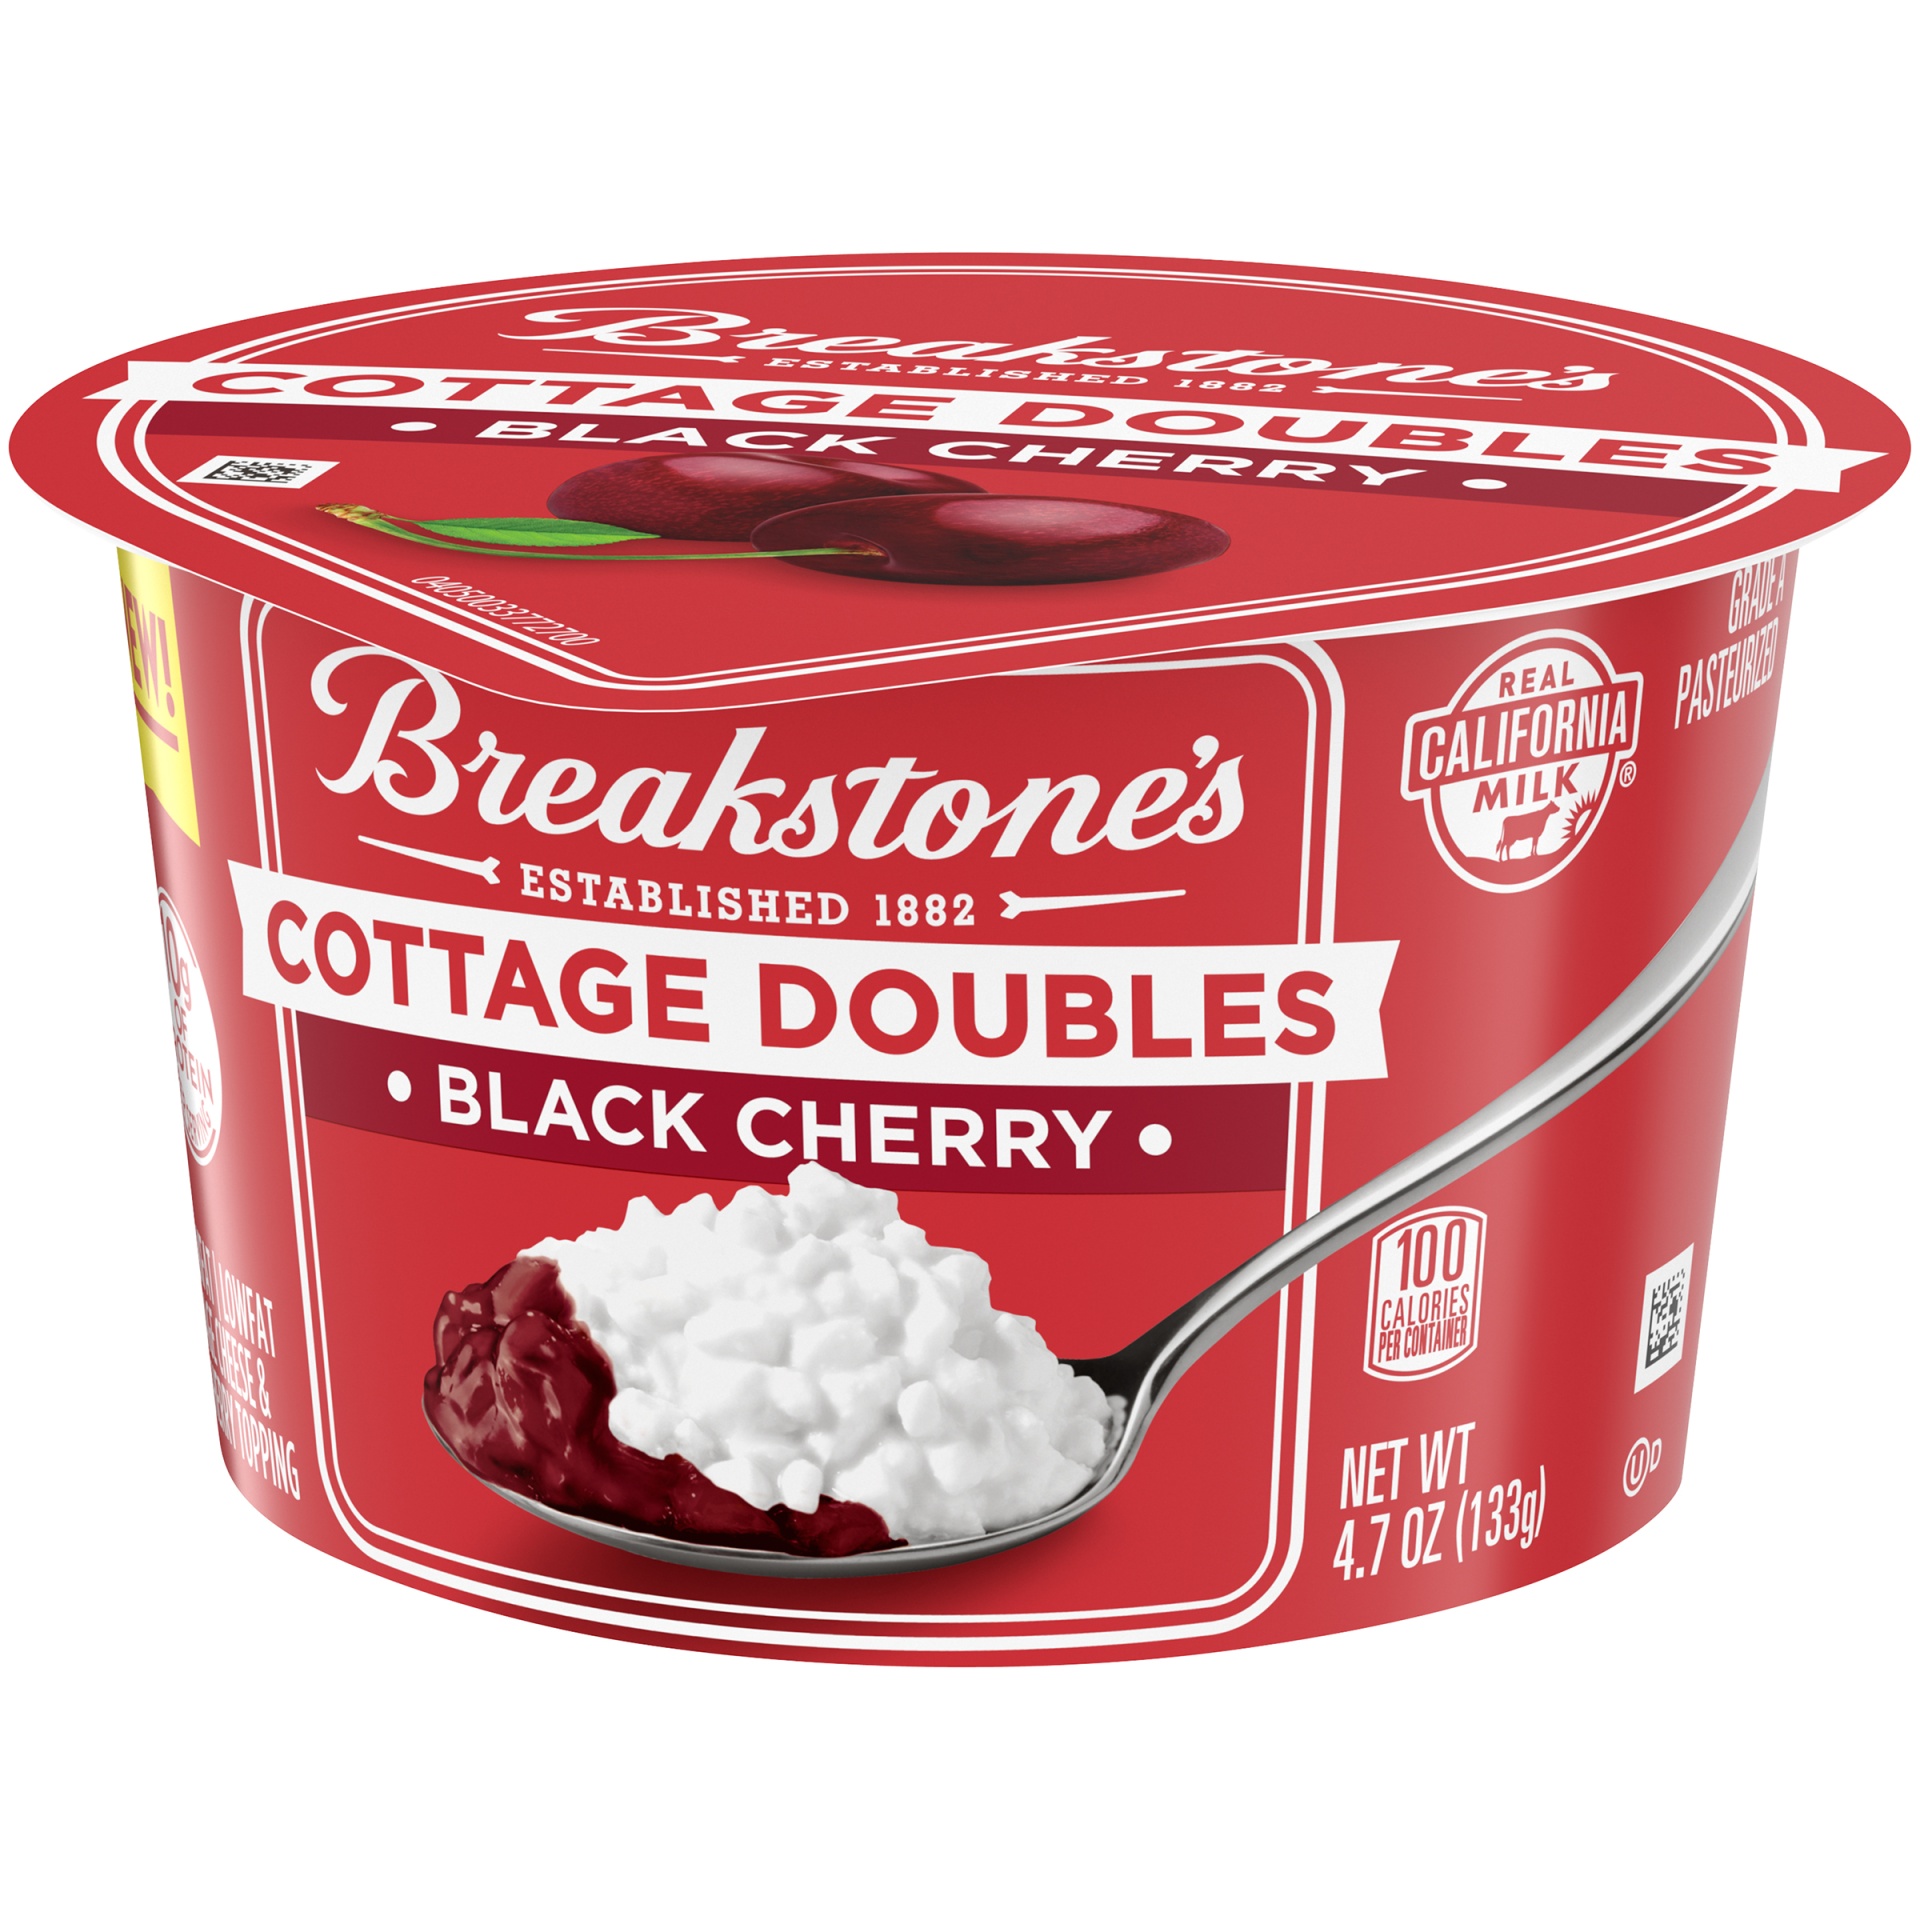 slide 3 of 6, Breakstone's Cottage Doubles Lowfat Cottage Cheese & Black Cherry Topping with 2% Milkfat Cup, 4.7 oz